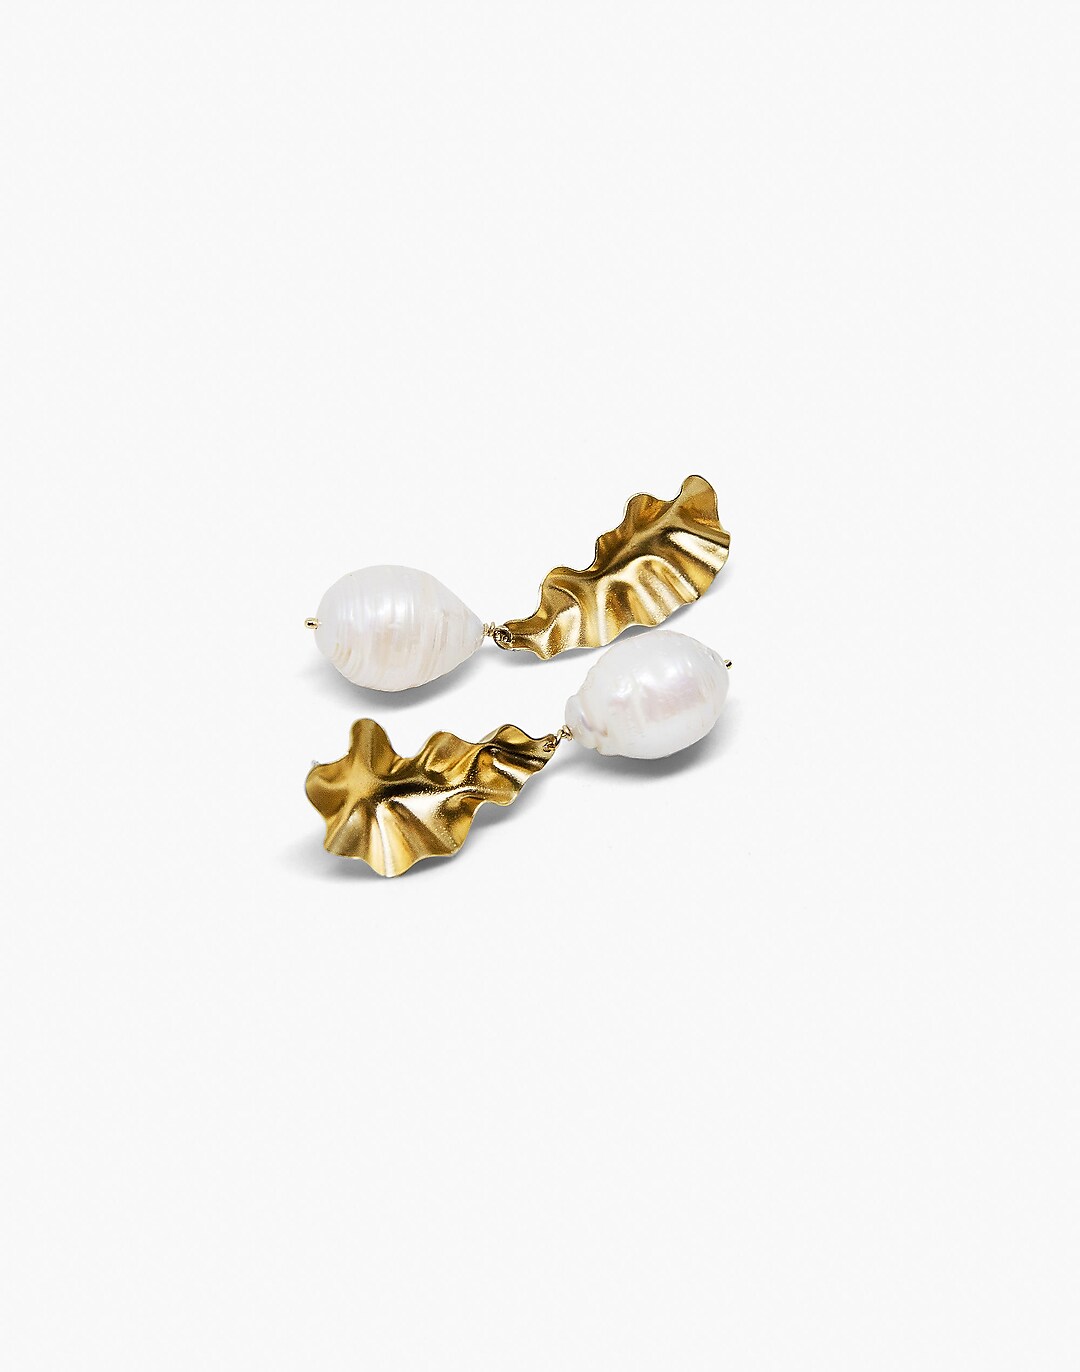 Aobei Pearl, 6 Pieces form the Sale, 18K Gold Earring Hoops with 3 Dangling  Holes for Jewelry Making, Jewelry Findings, DIY Handmade Earring  Accessories, ETS-K517